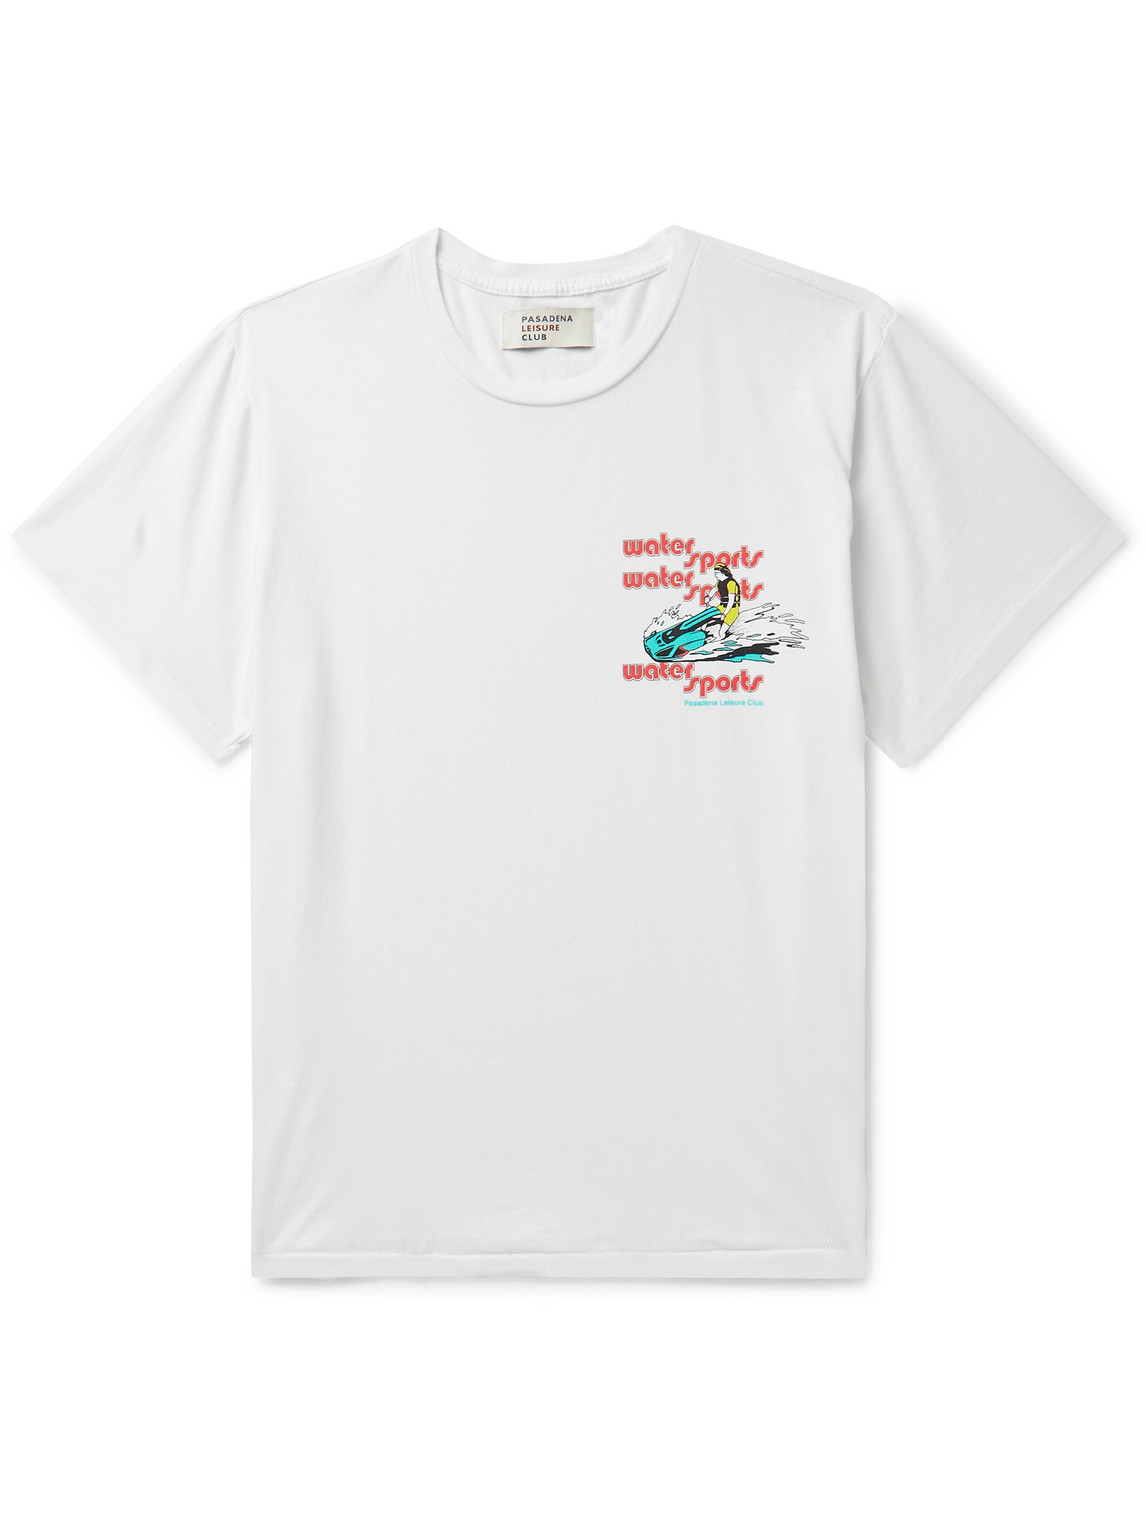 Pasadena Leisure Club Water Sports Printed Cotton-jersey T-shirt In White